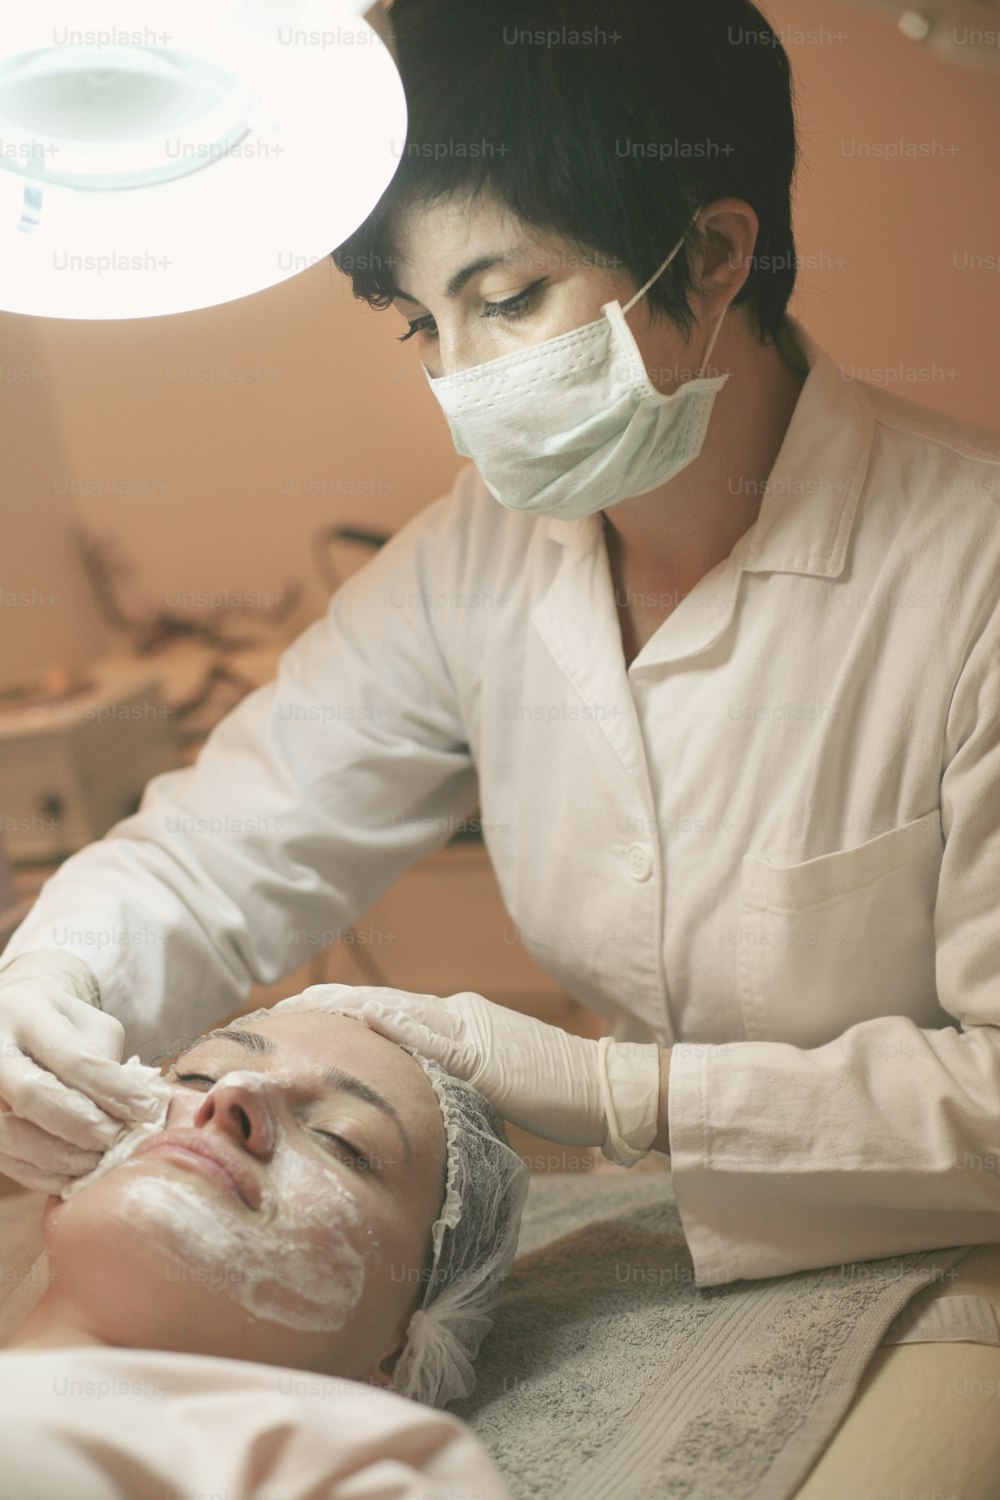 Young woman in a spa center. Lying on a massage table with a mask on her face. Ambient light and pilot lamps used.